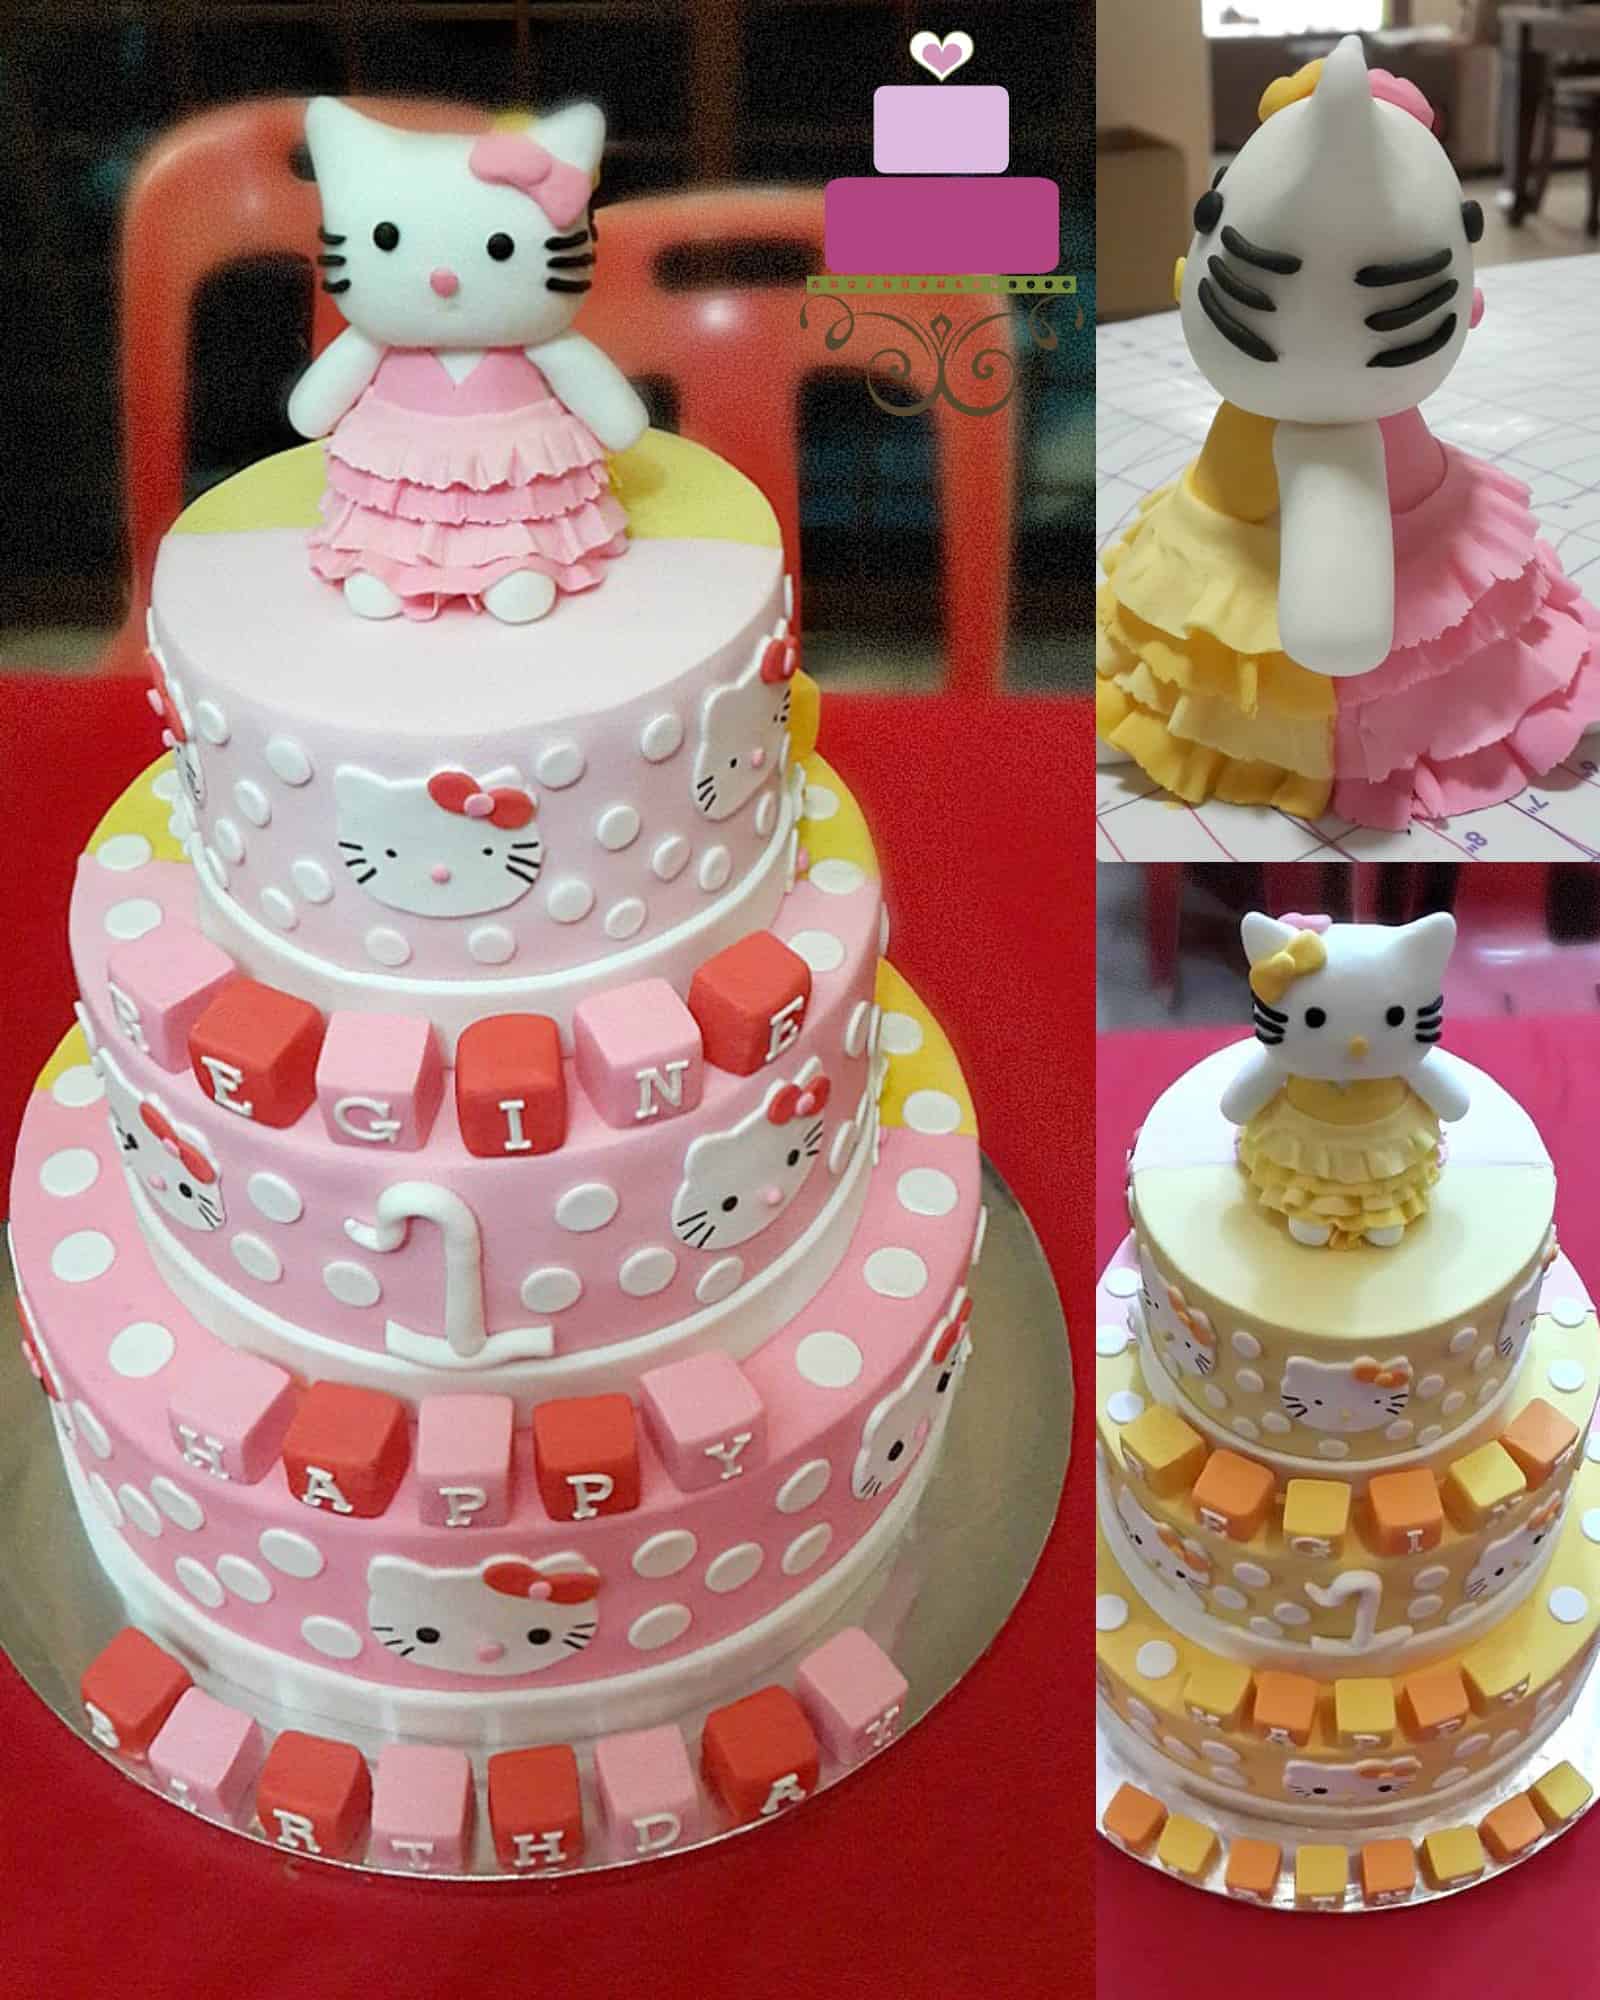 A dual toned Hello Kitty, 3 tier cake with Hello Kitty topper.